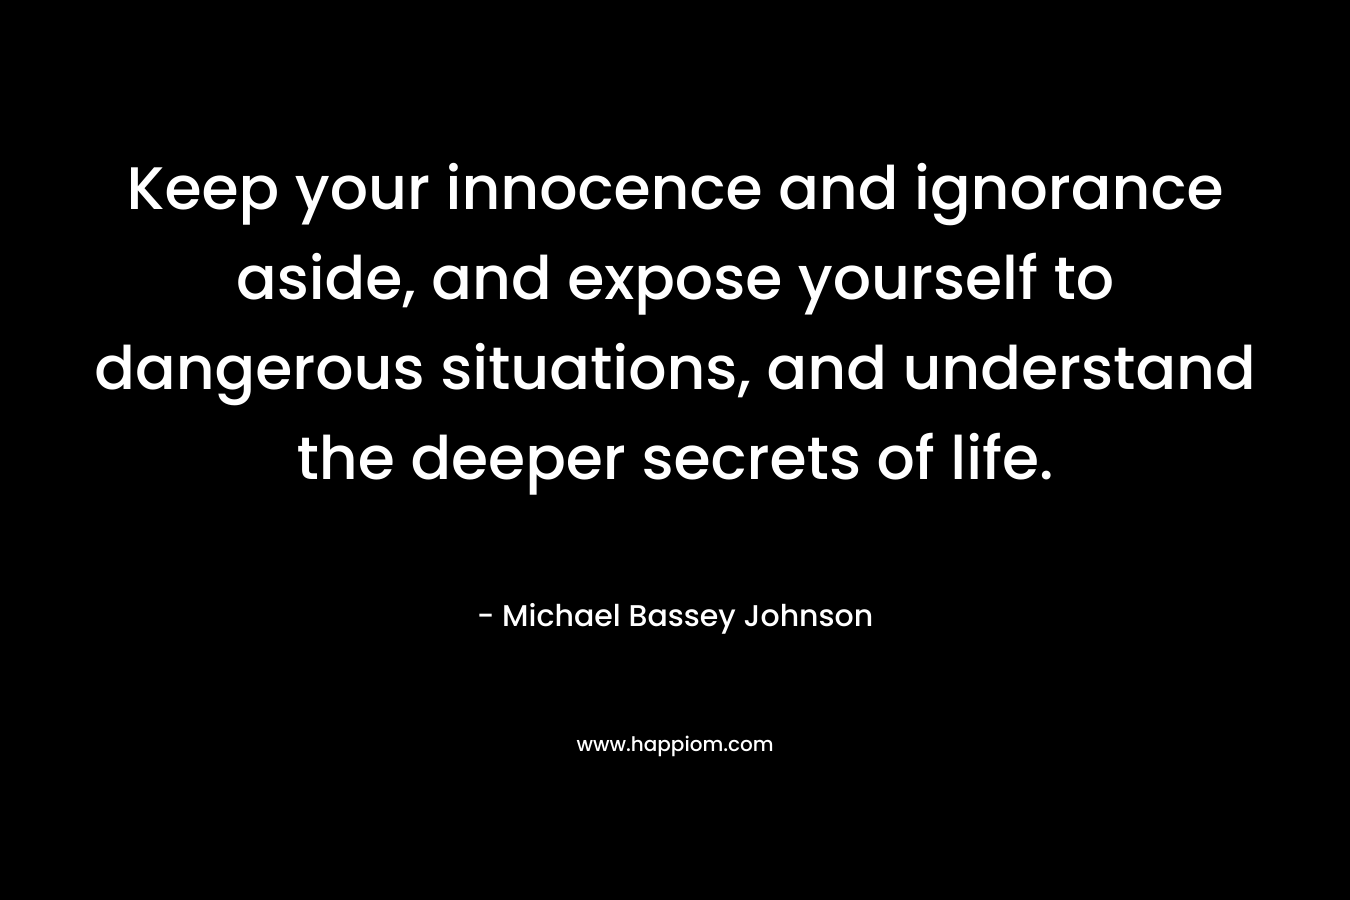 Keep your innocence and ignorance aside, and expose yourself to dangerous situations, and understand the deeper secrets of life.